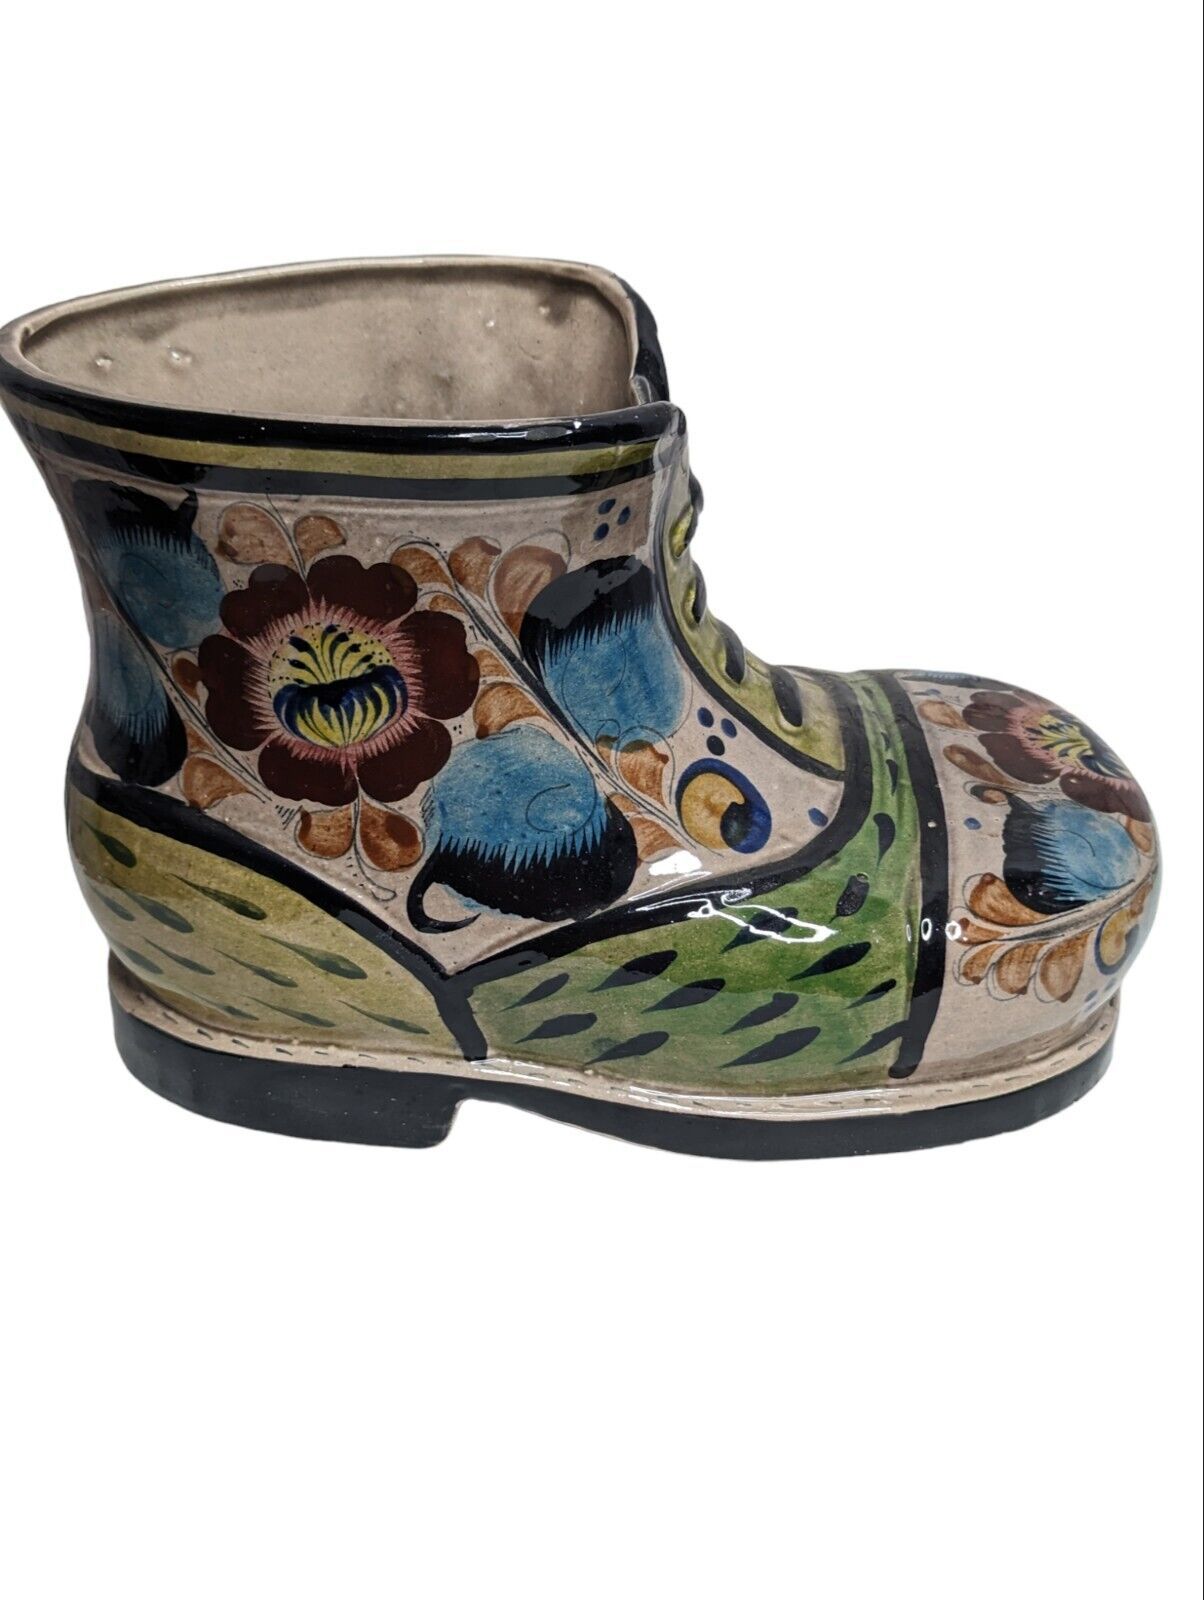 Primary image for Vintage 1979 Mexican Hand Painted Boot Floral Flower Ceramic Glaze Planter Vase